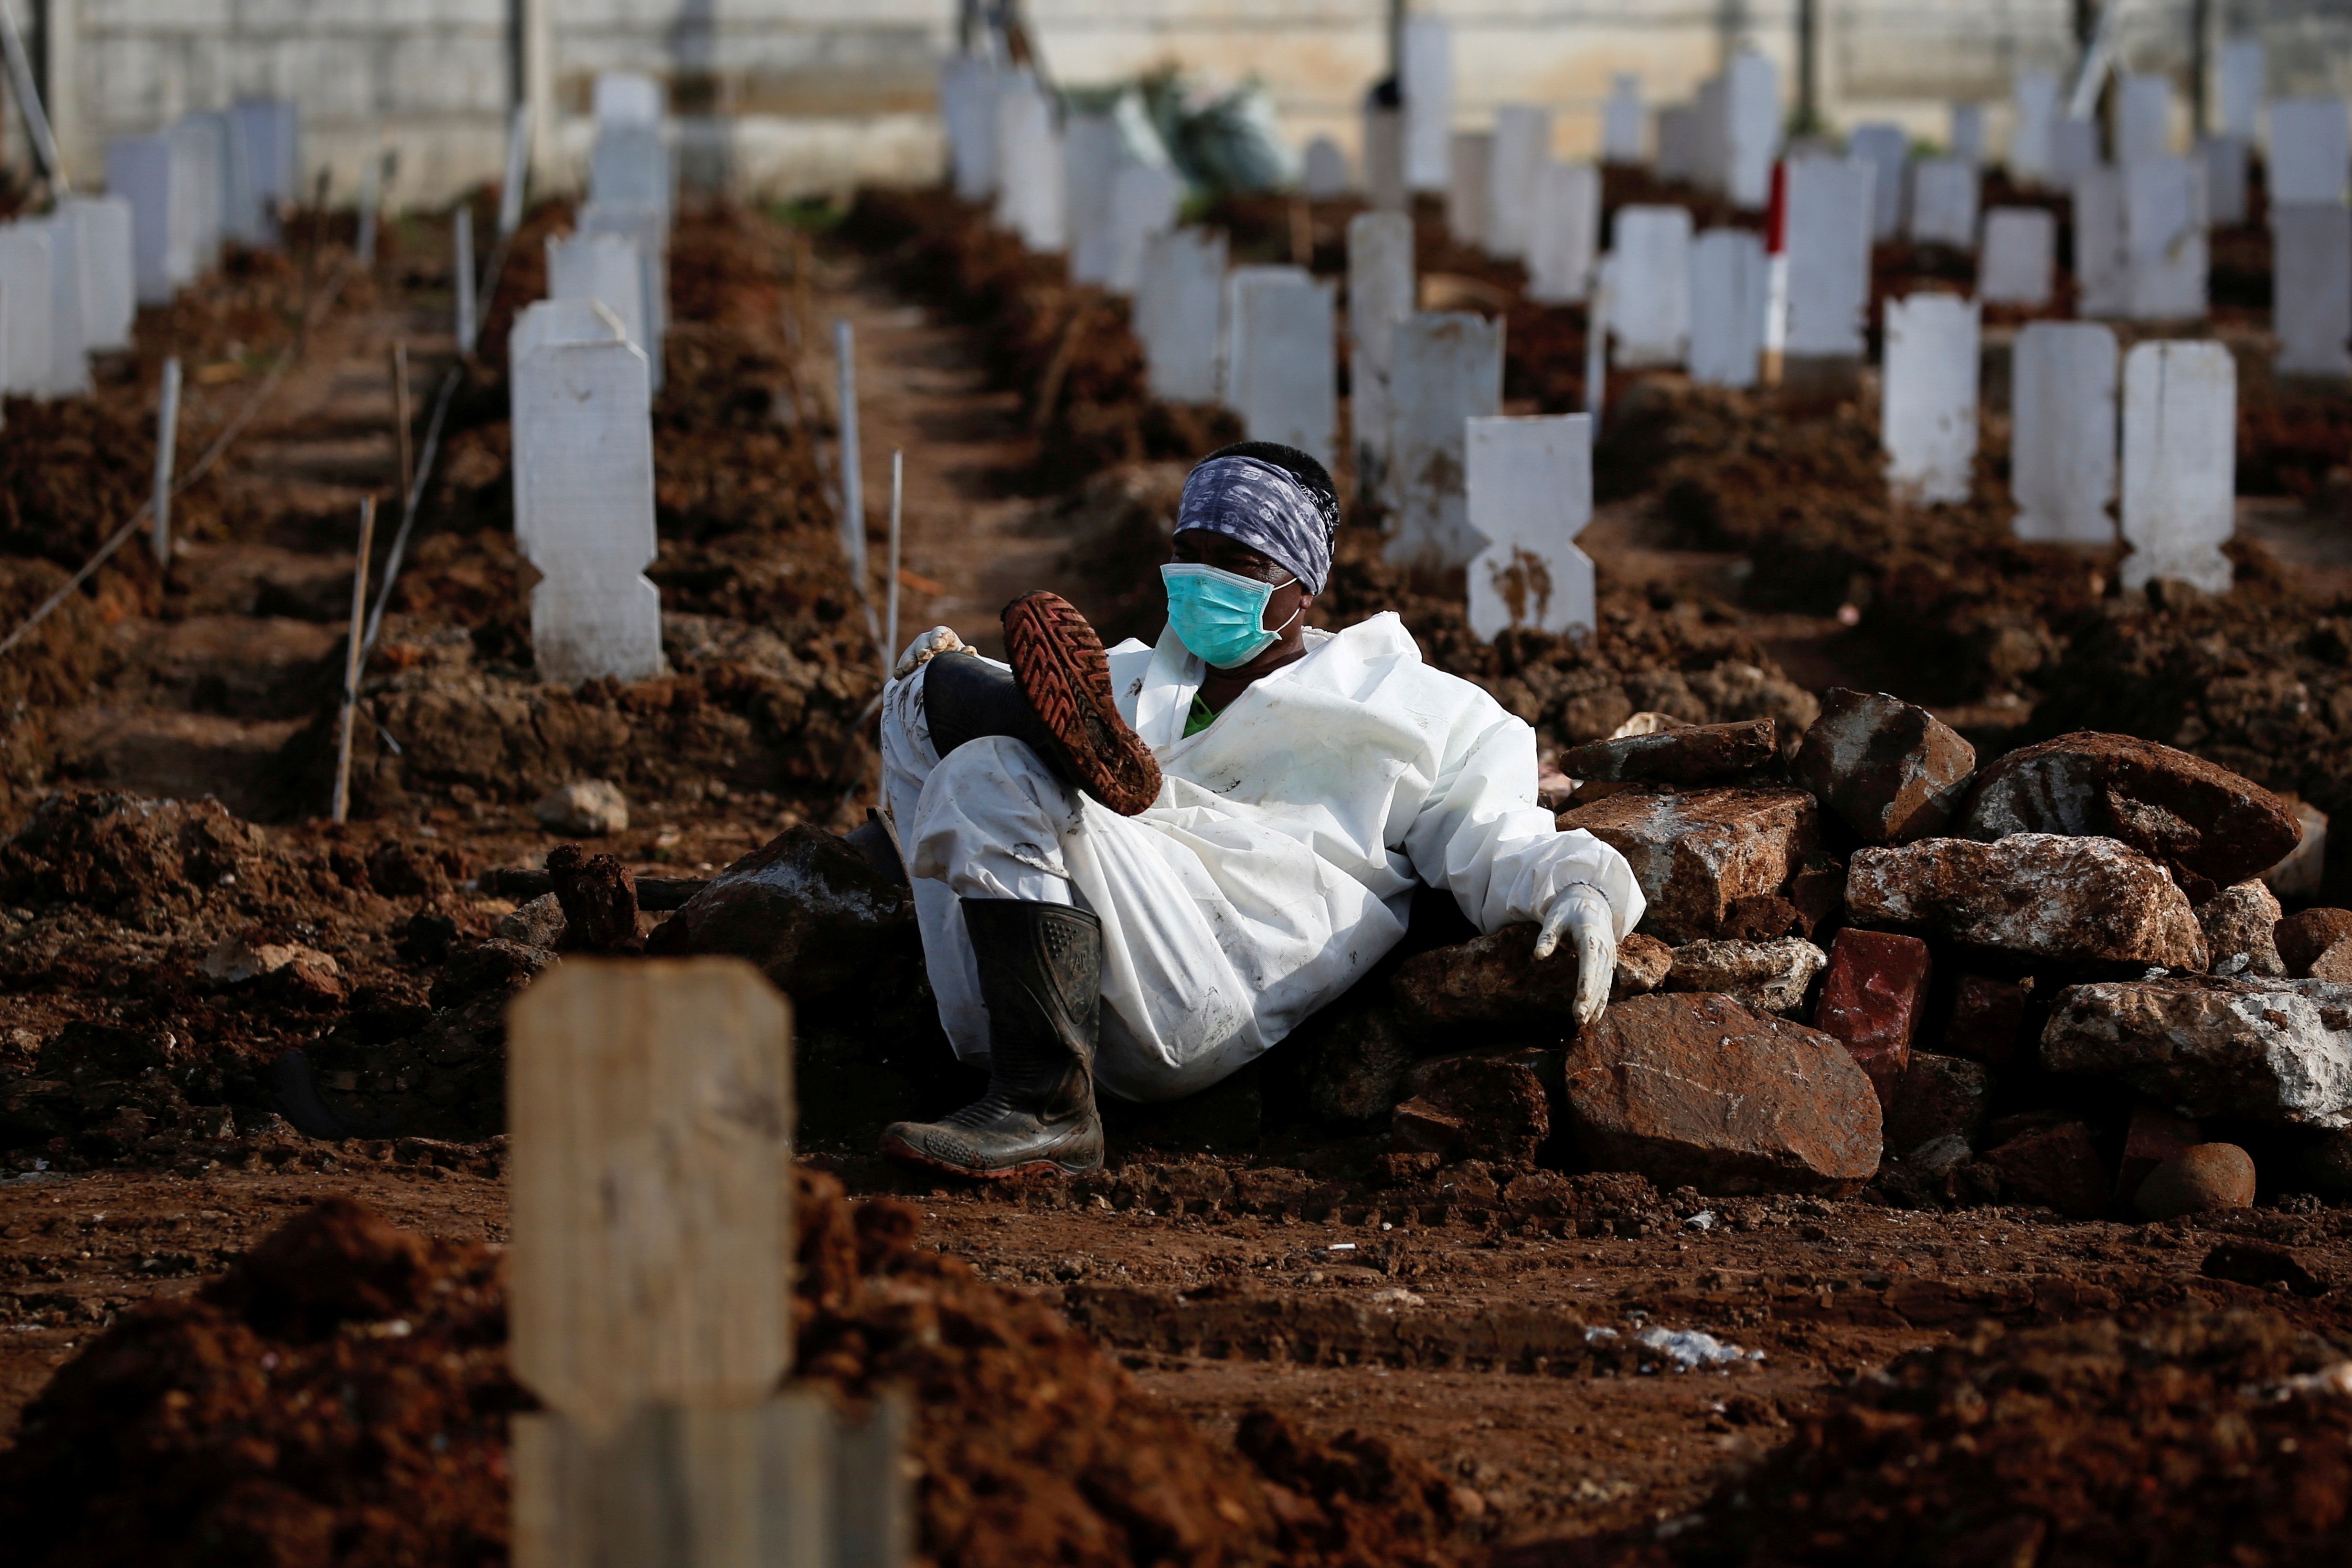 Municipality worker wearing PPE rests at the burial area provided by the government for COVID-19 victims in Jakarta